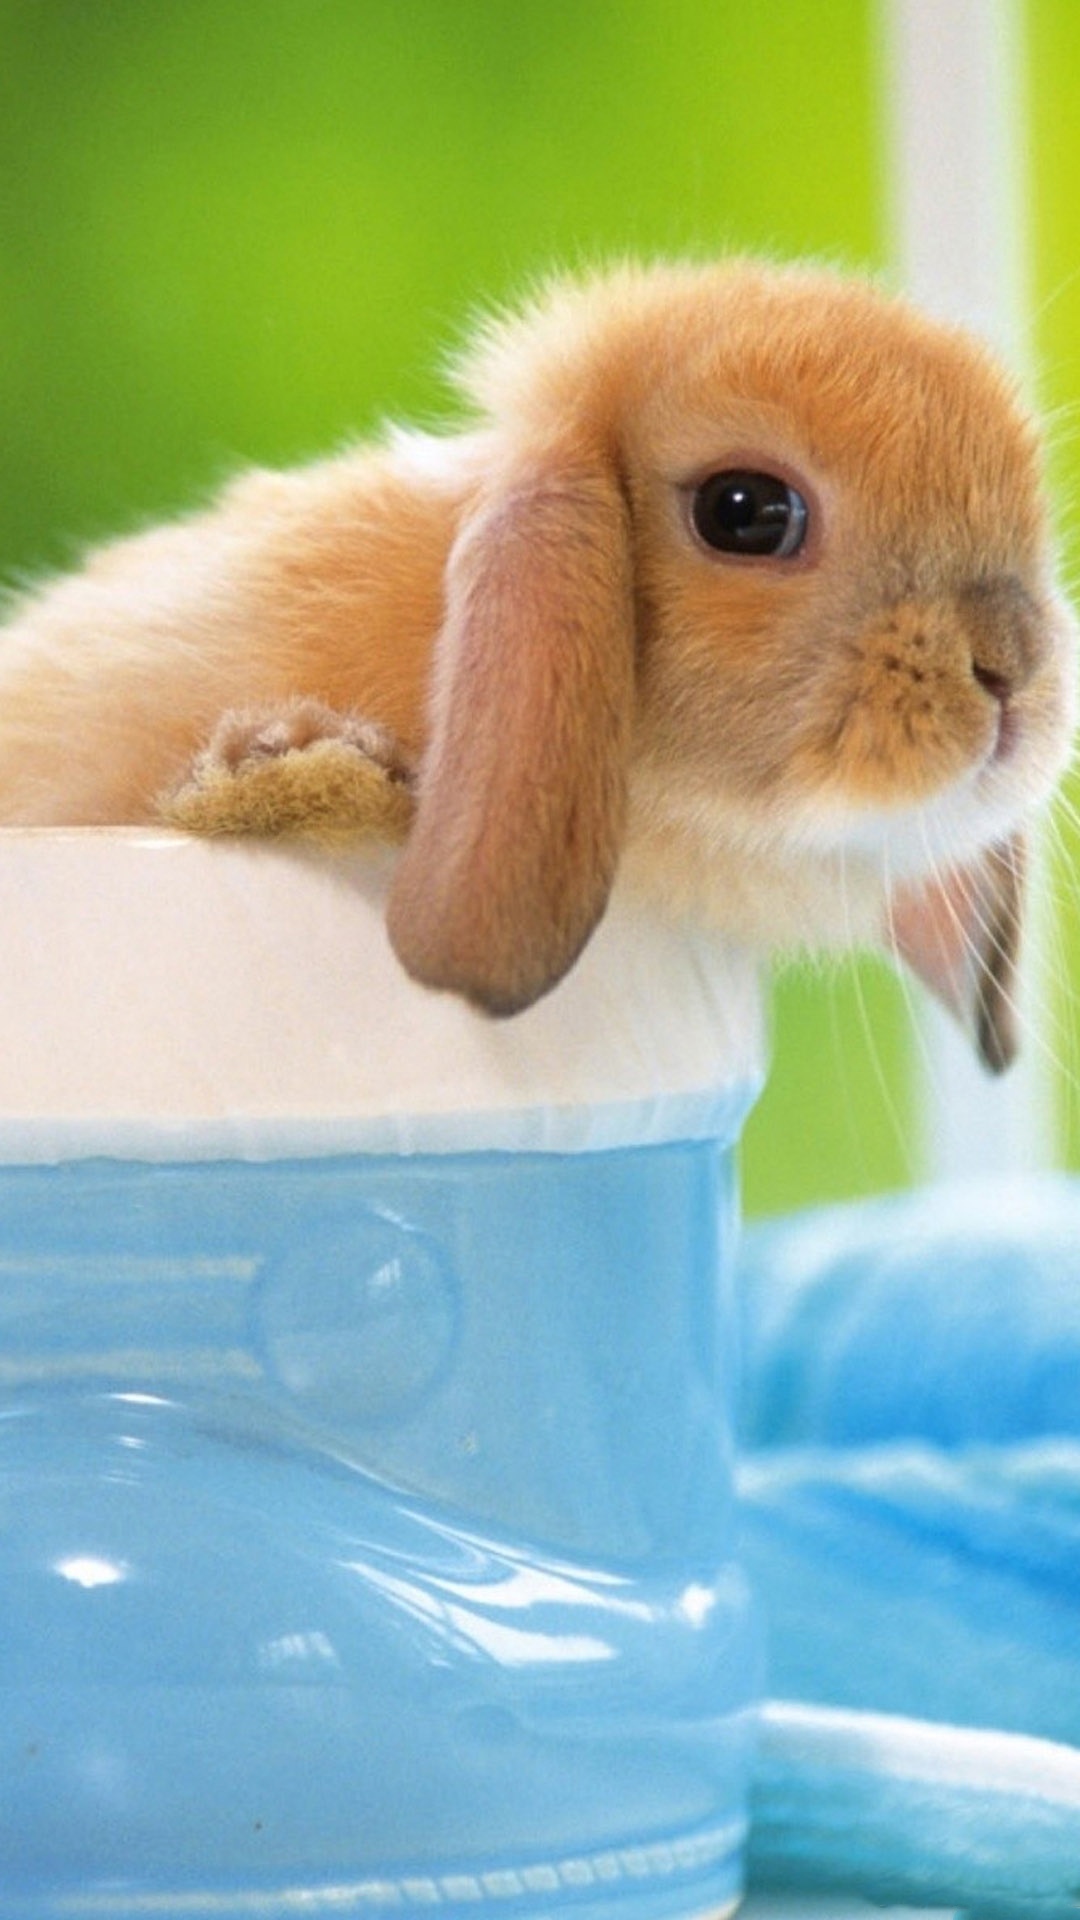 Cute Bunny Iphone 6 Plus Hd Wallpaper - Cute Baby Bunnies In A Cup , HD Wallpaper & Backgrounds